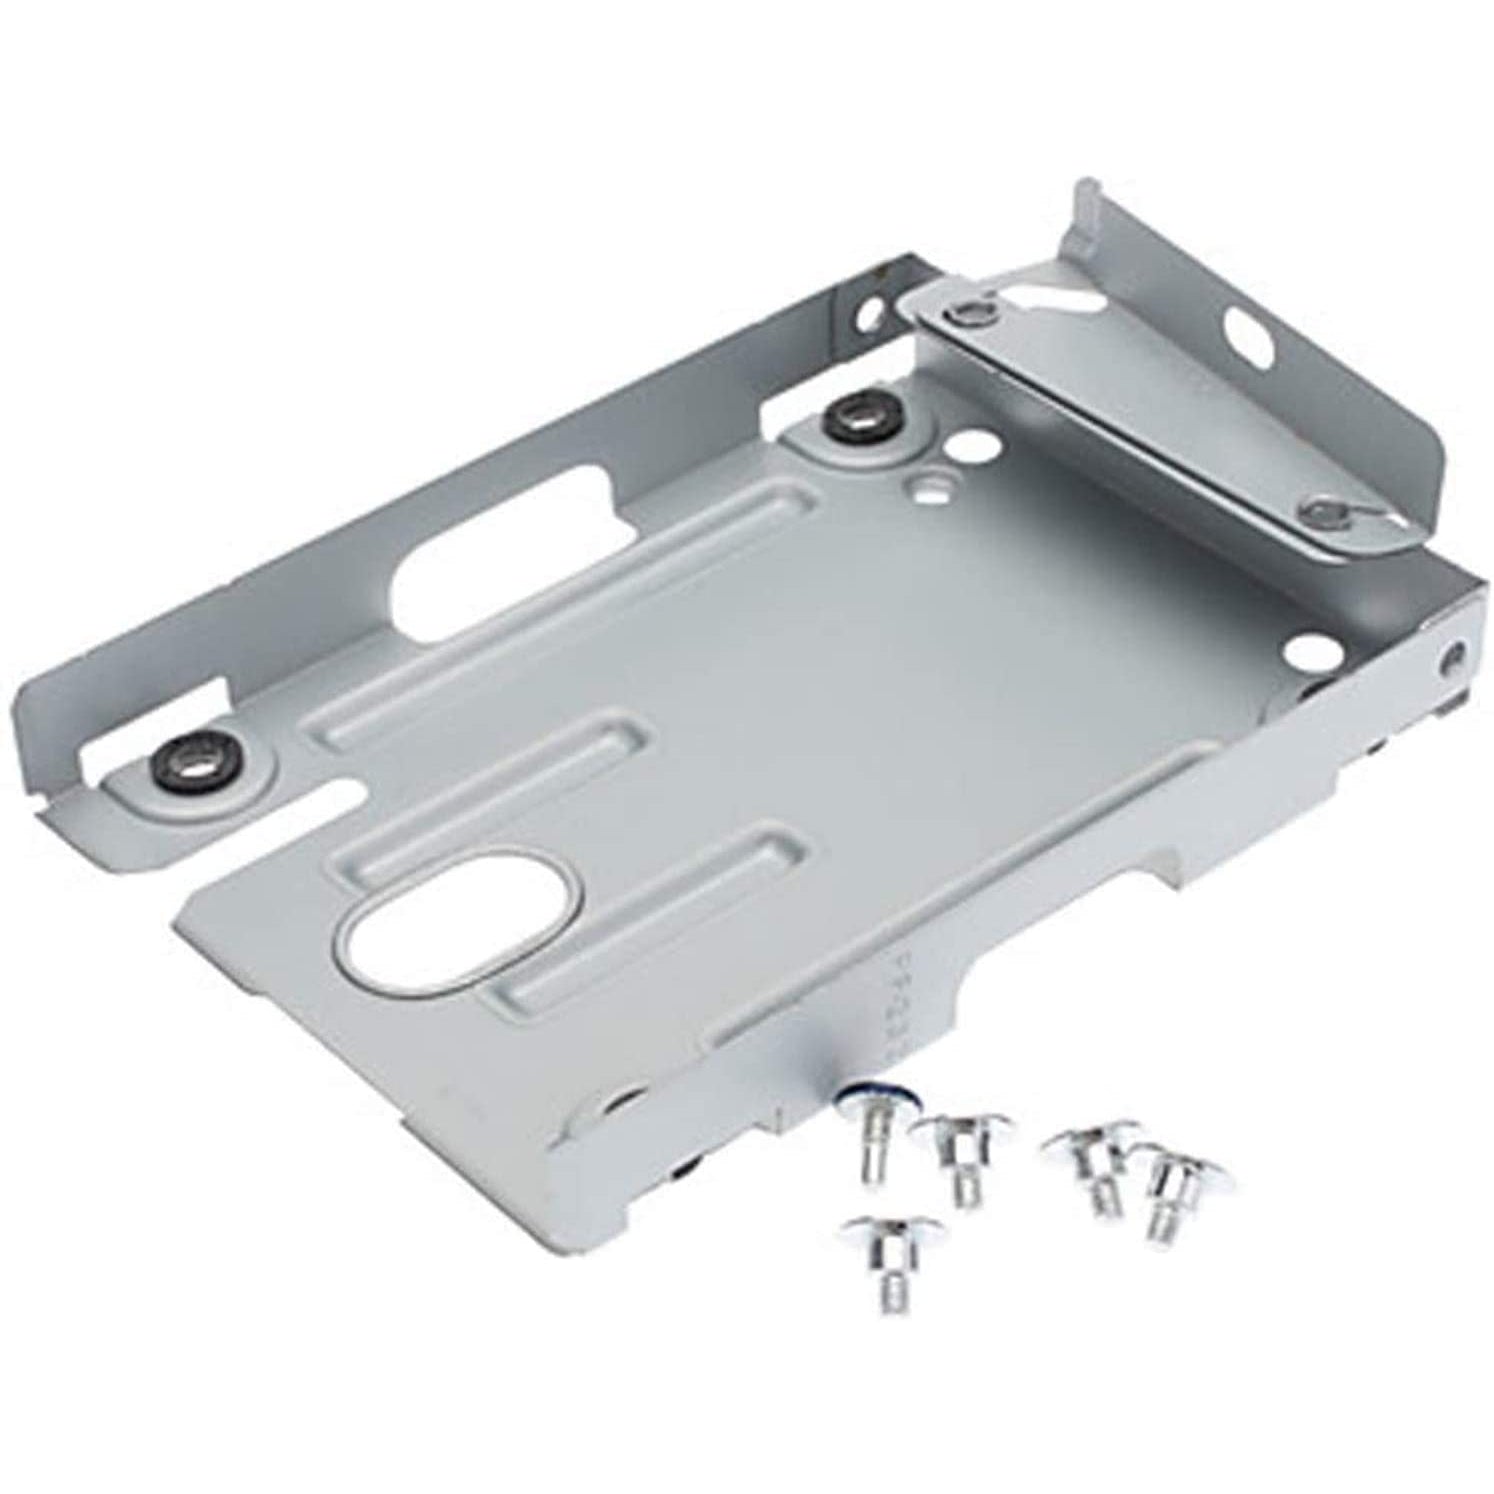 Sony PlayStation 3 Hard Disk Drive (HDD) with Mounting Bracket